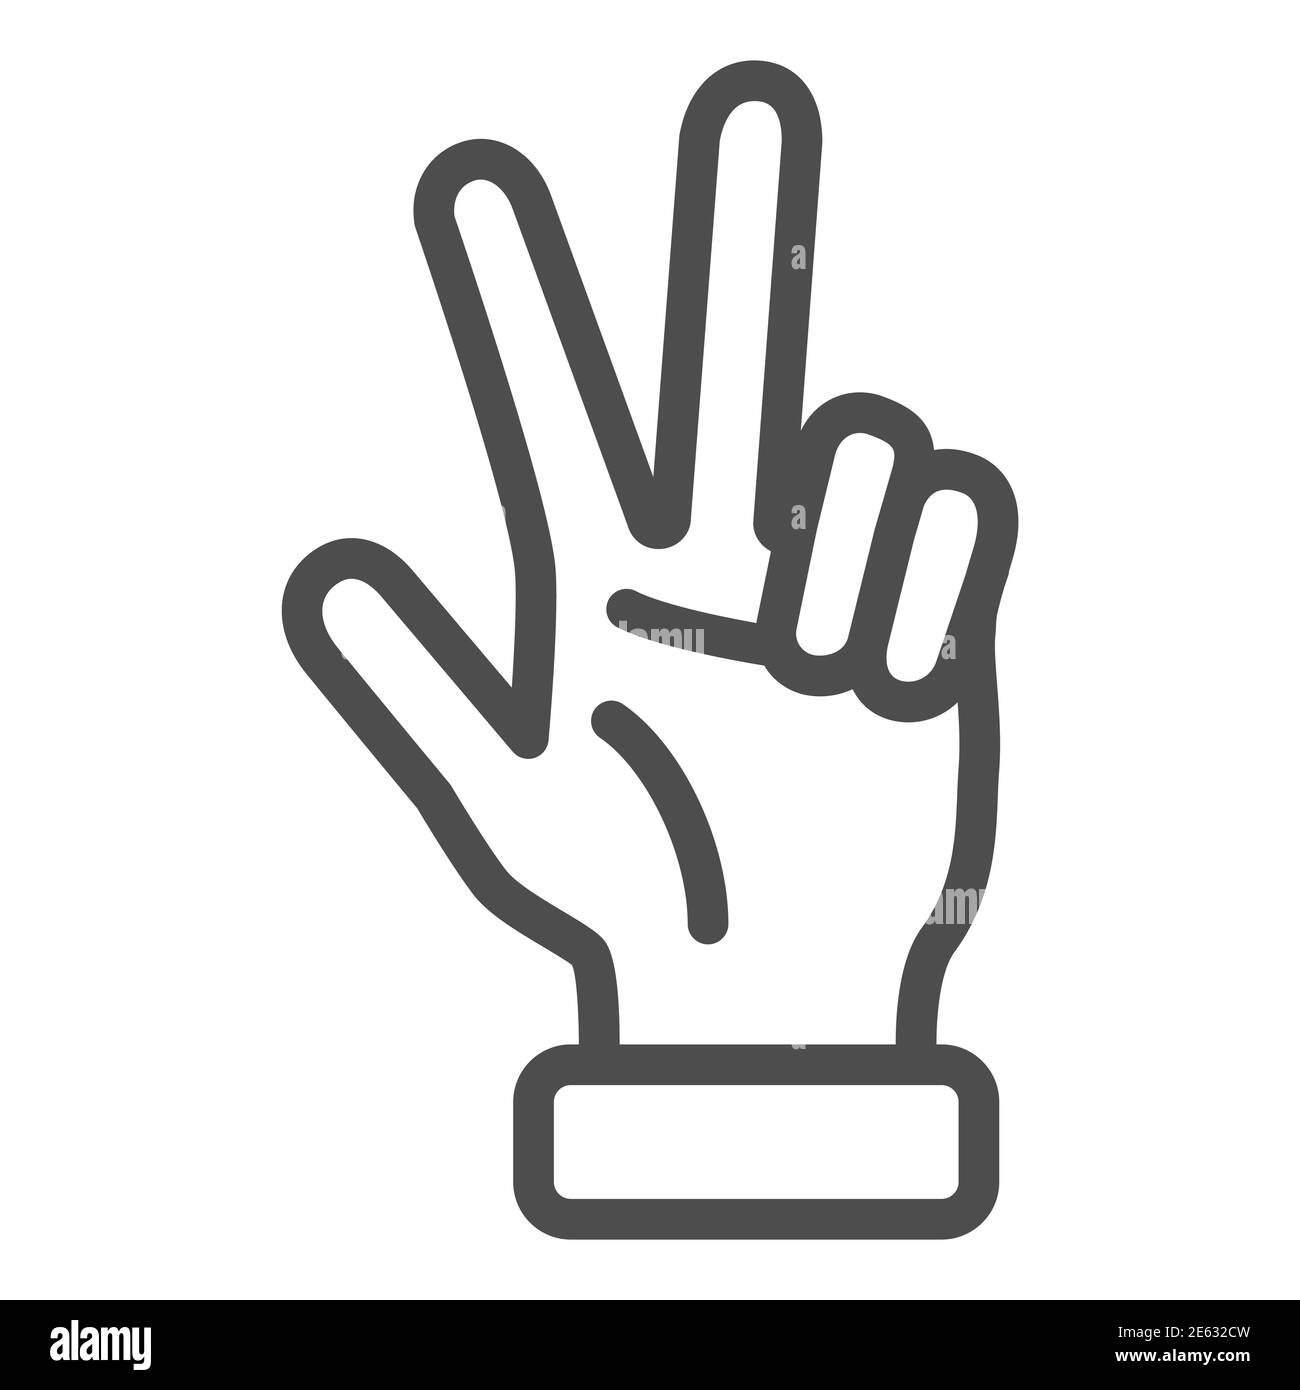 Hand showing three fingers line icon, Hand gestures concept, Three finger gesture sign on white background, hand showing number three icon in outline Stock Vector